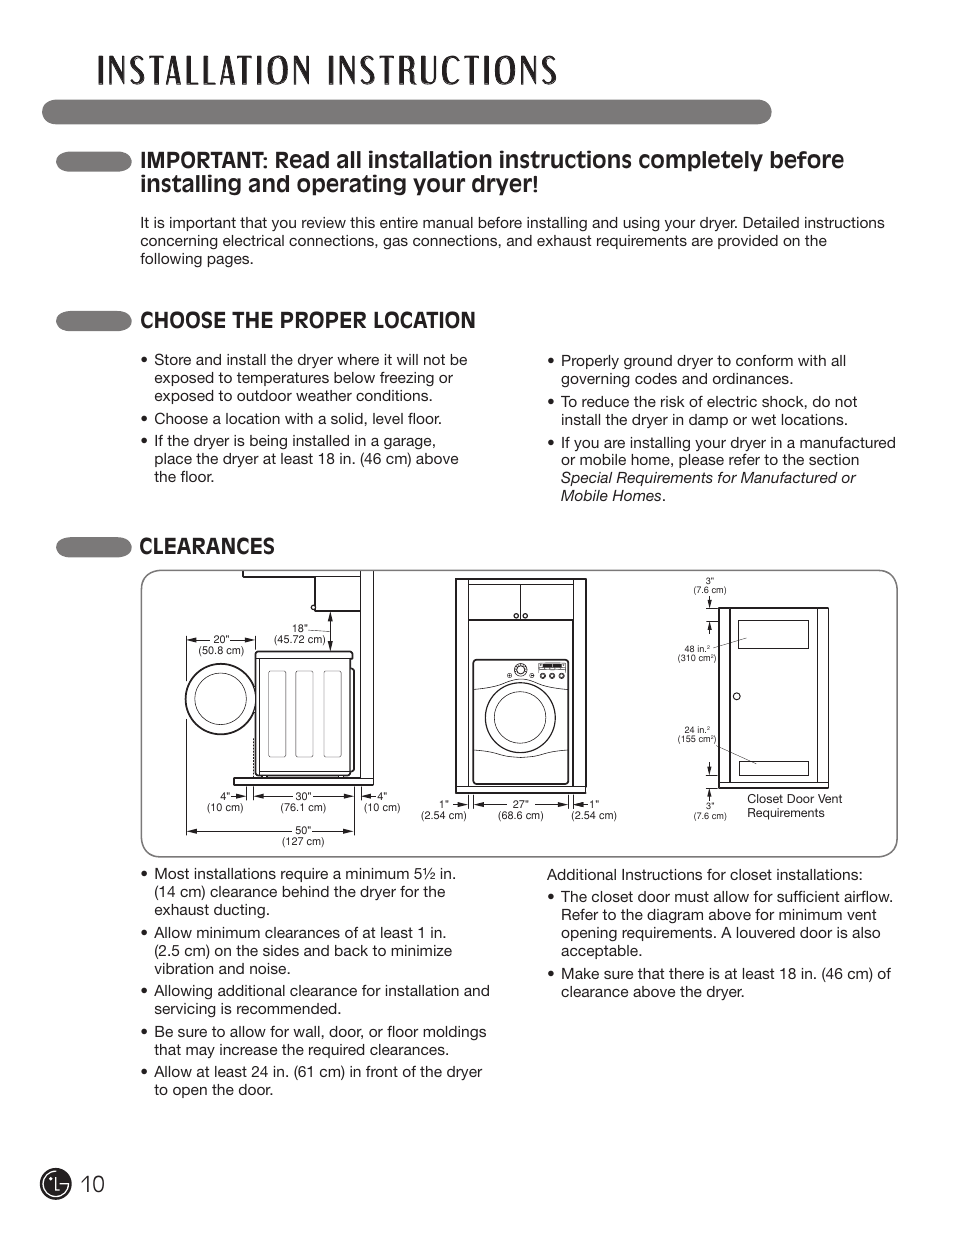 Choose the proper location, Clearances | LG D5966W User Manual | Page 10 / 80